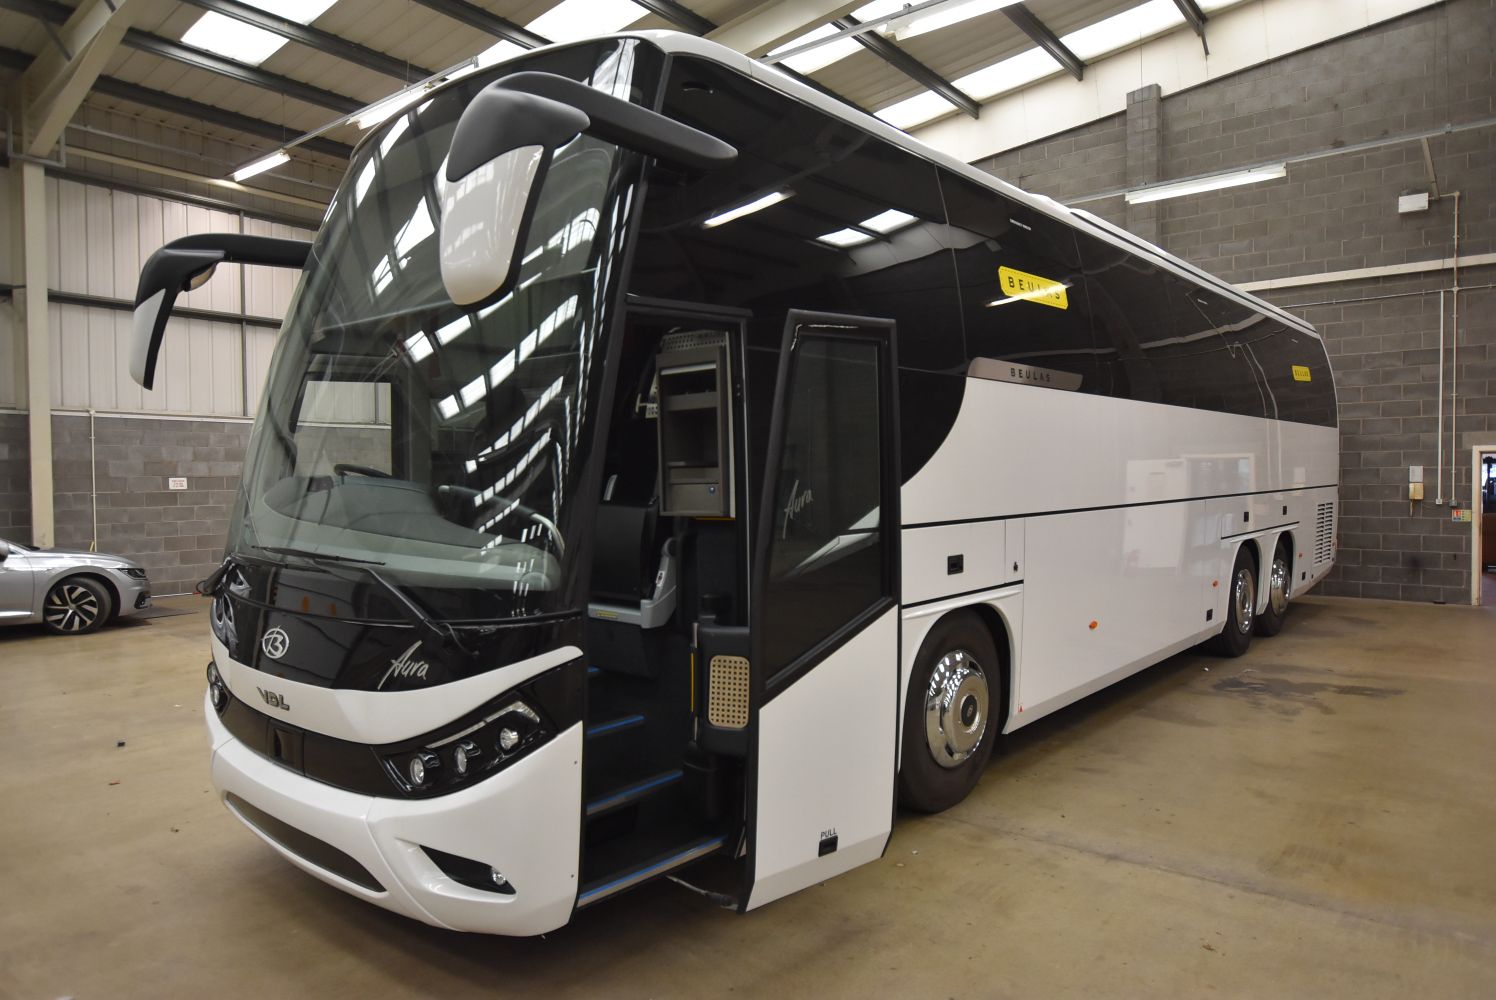 15 Coaches, Spare Parts Stock, Commercial Garage & Fabrication Plant & Equipment, Factory & Office Furnishings, Vans & Private Vehicle(700 lots)